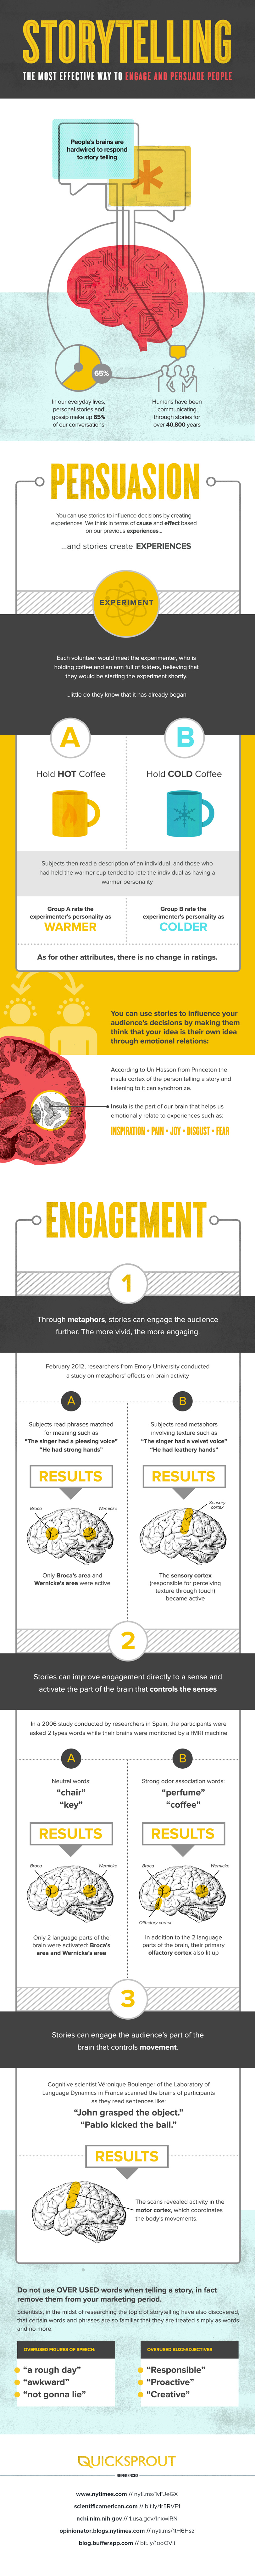 Infographic on how to use storytelling in your content.